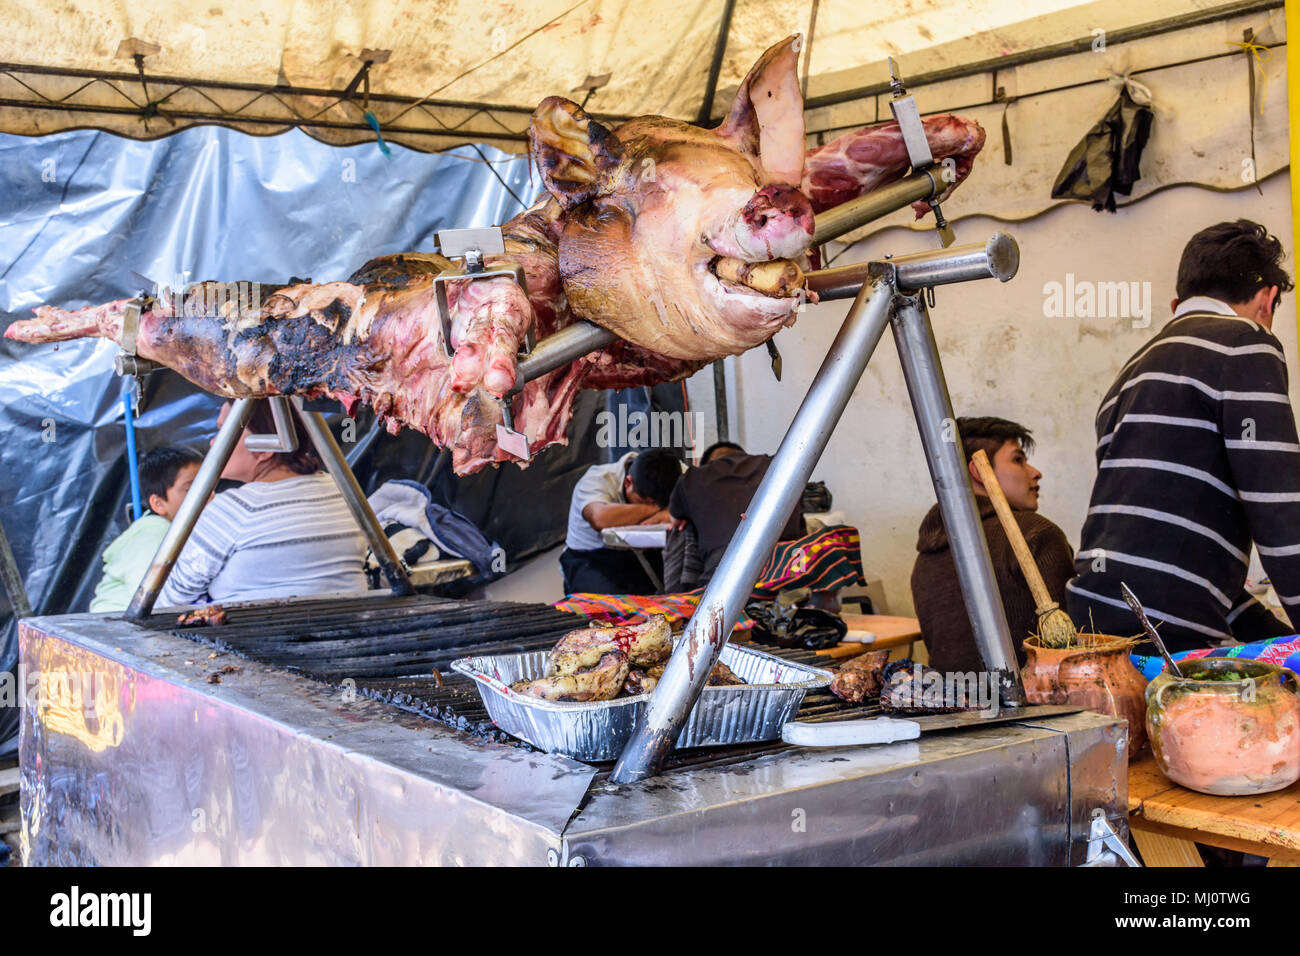 Santiago Sacatepequez, Guatemala - November 1, 2017: Whole roasted pig on spit at streetside food stall during giant kite festival on All Saints' Day Stock Photo